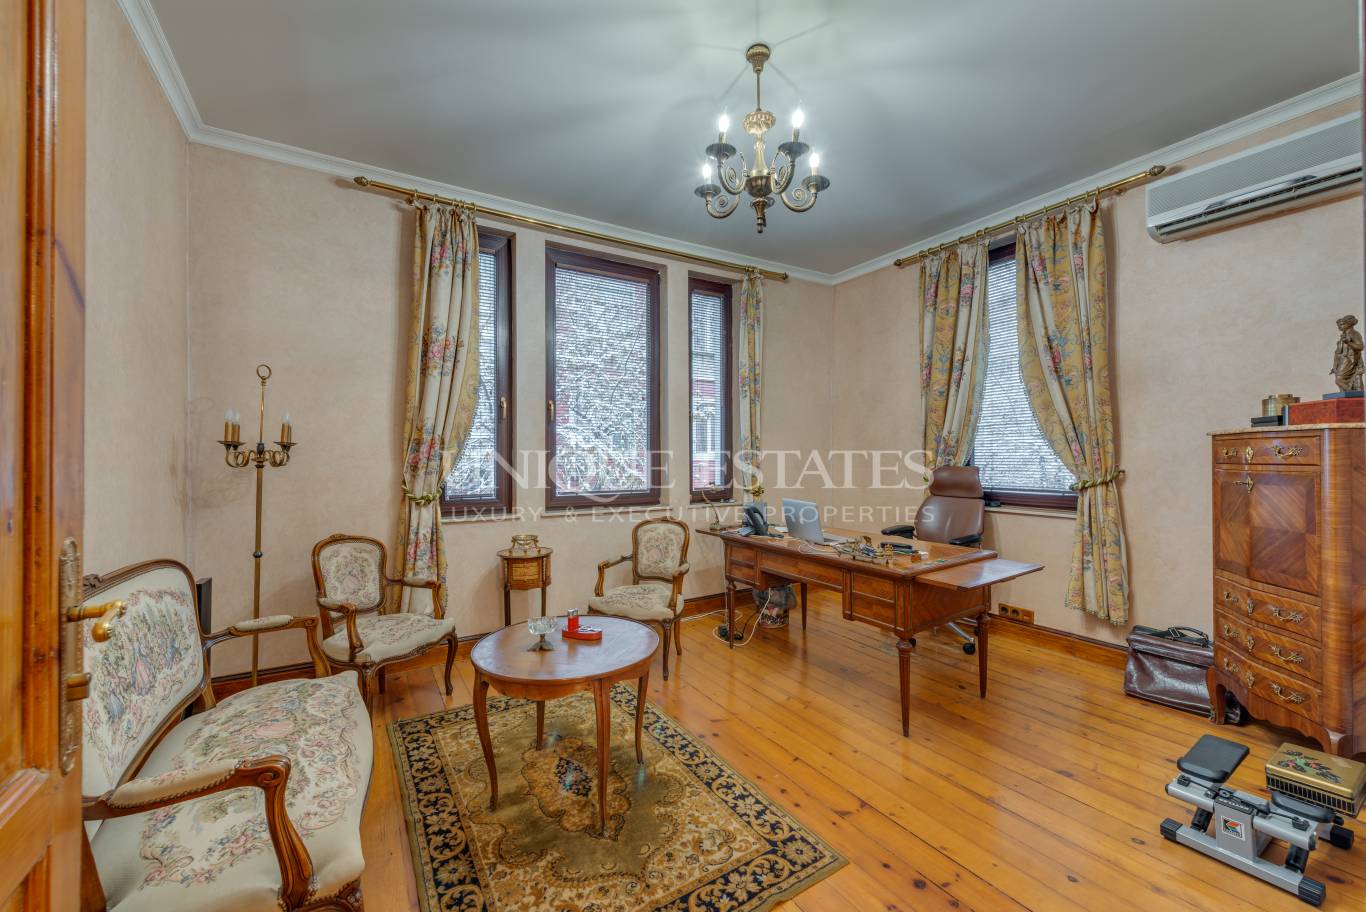 House for sale in Sofia, Oborishte with listing ID: K10563 - image 3